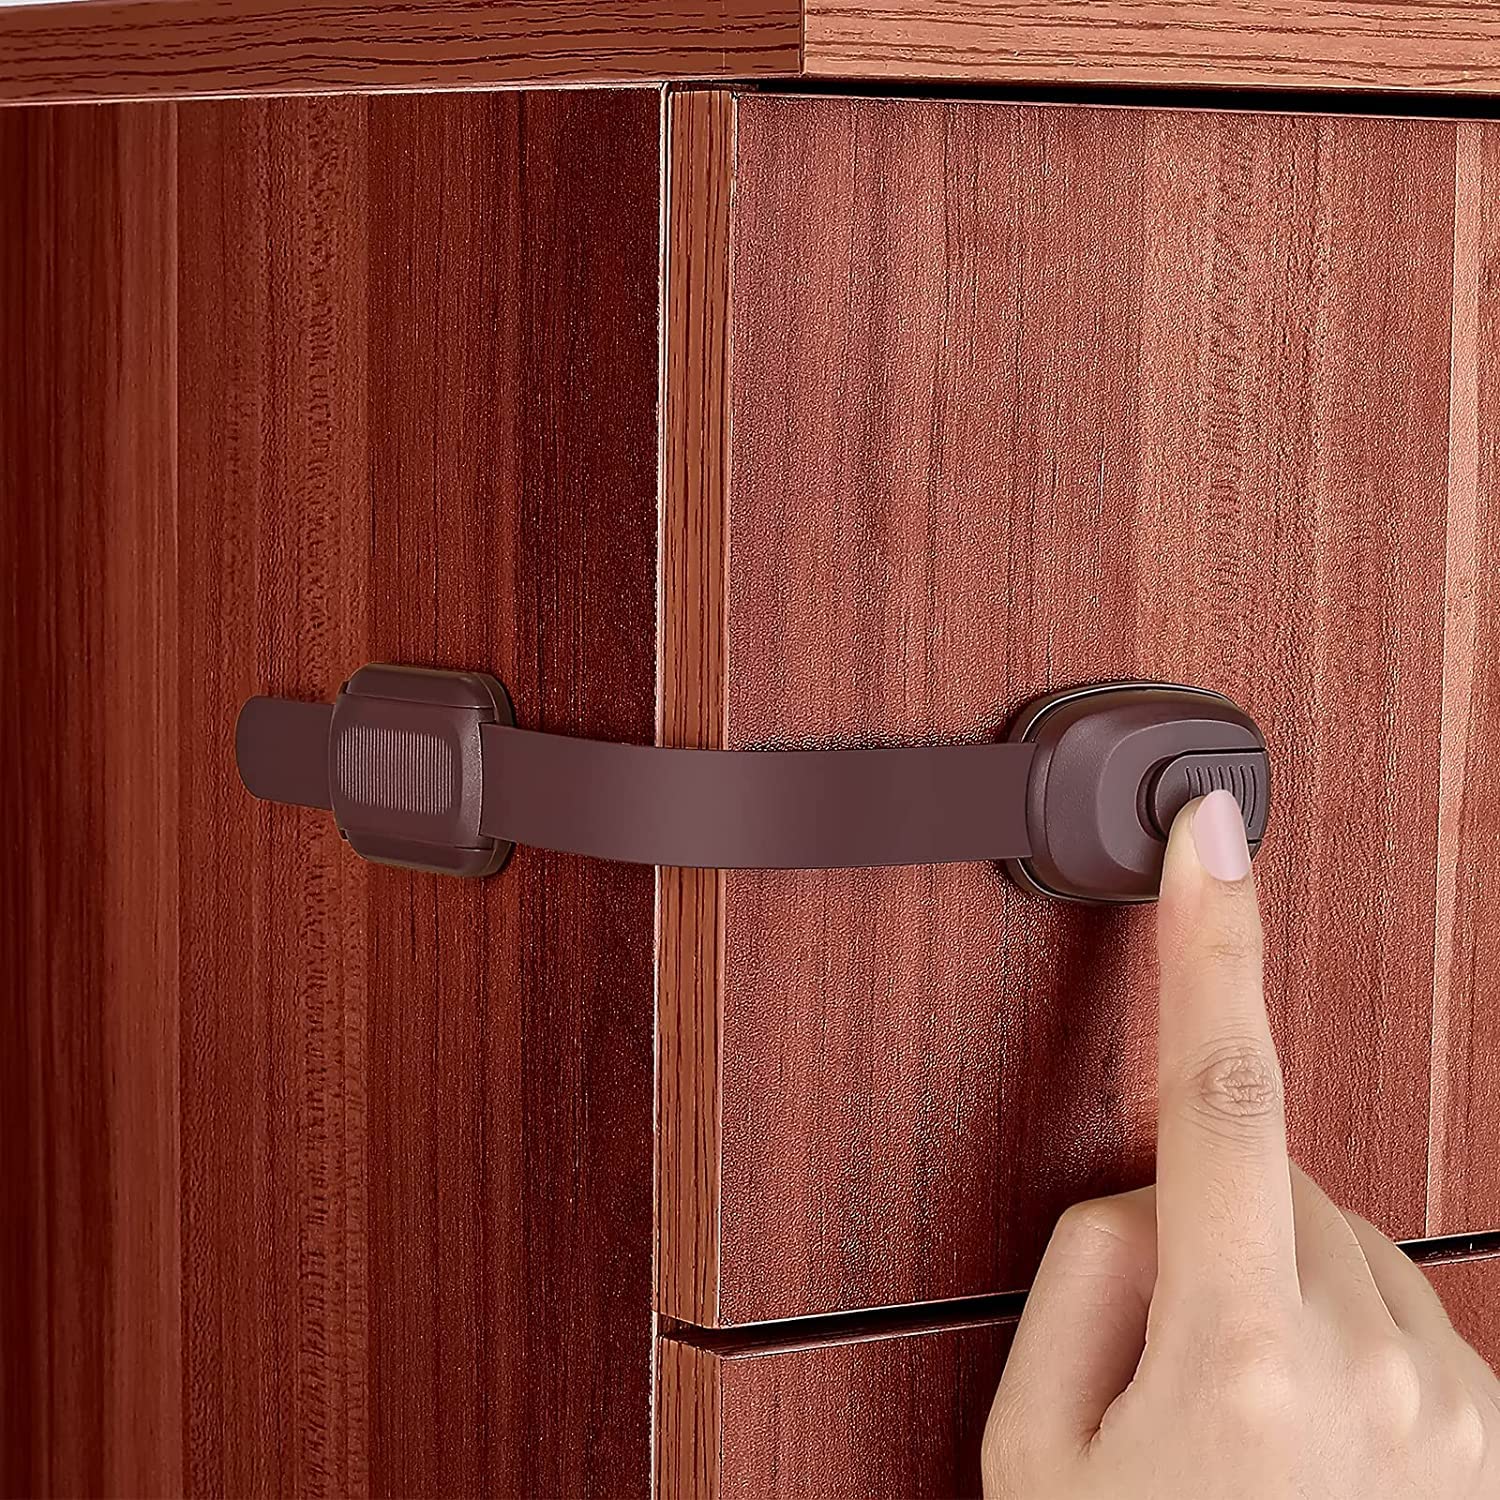 Child Proof Cabinet & Drawer Latches | Evenflo Official Site